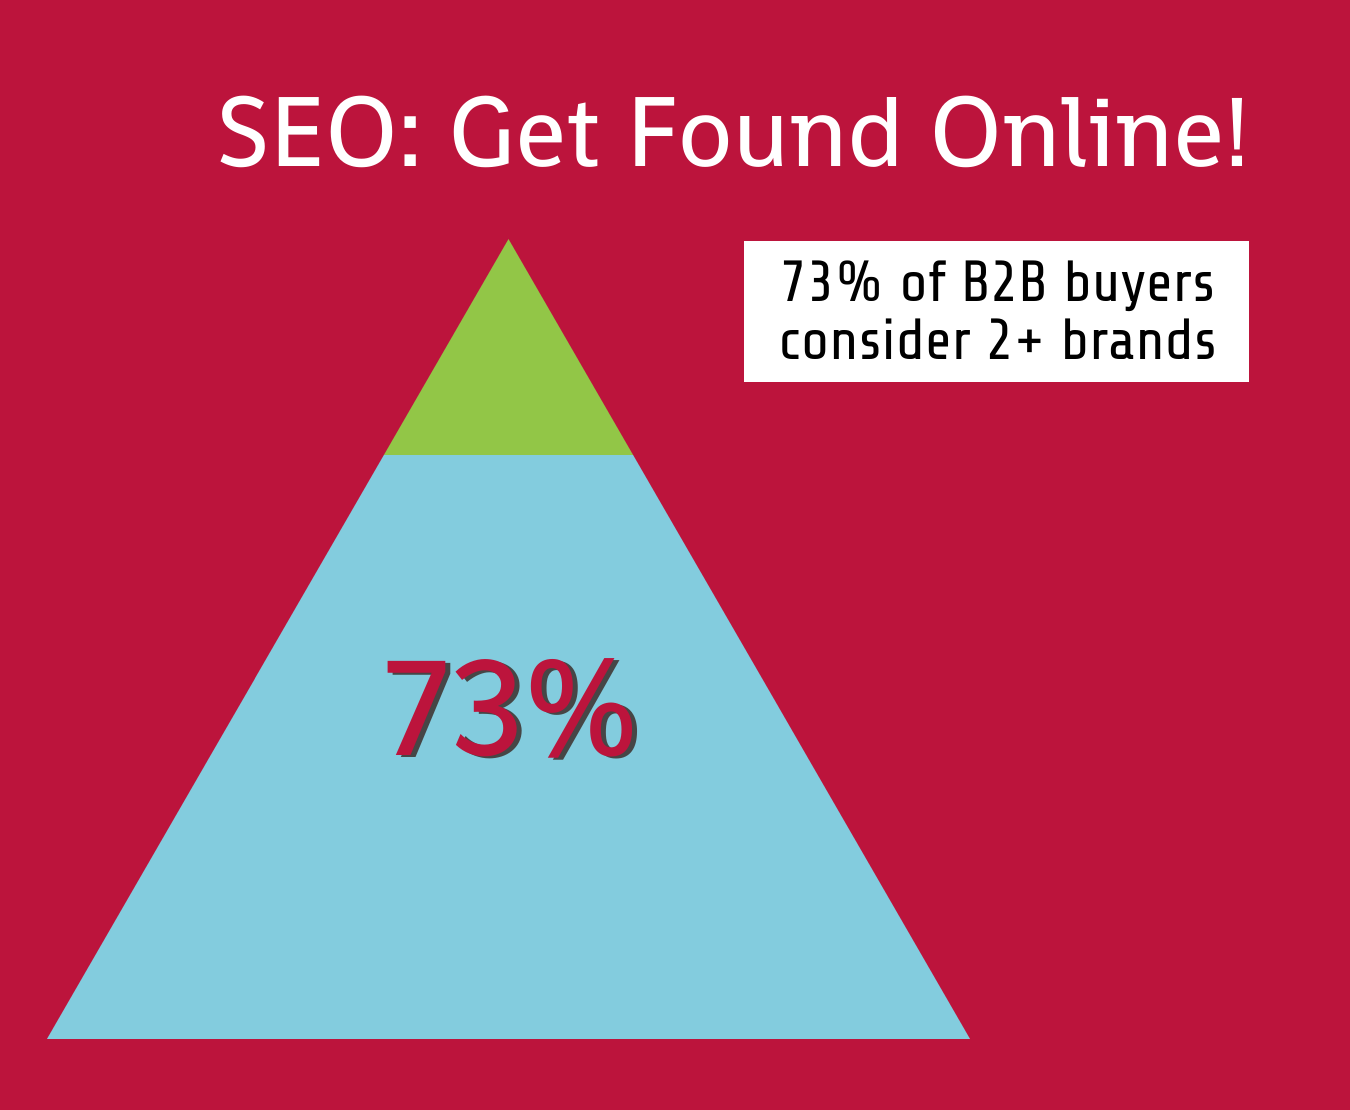 SEO for B2B small businesses matters more now than ever as 73% of industrial buyers consider two or more brands before making a purchasing decision.